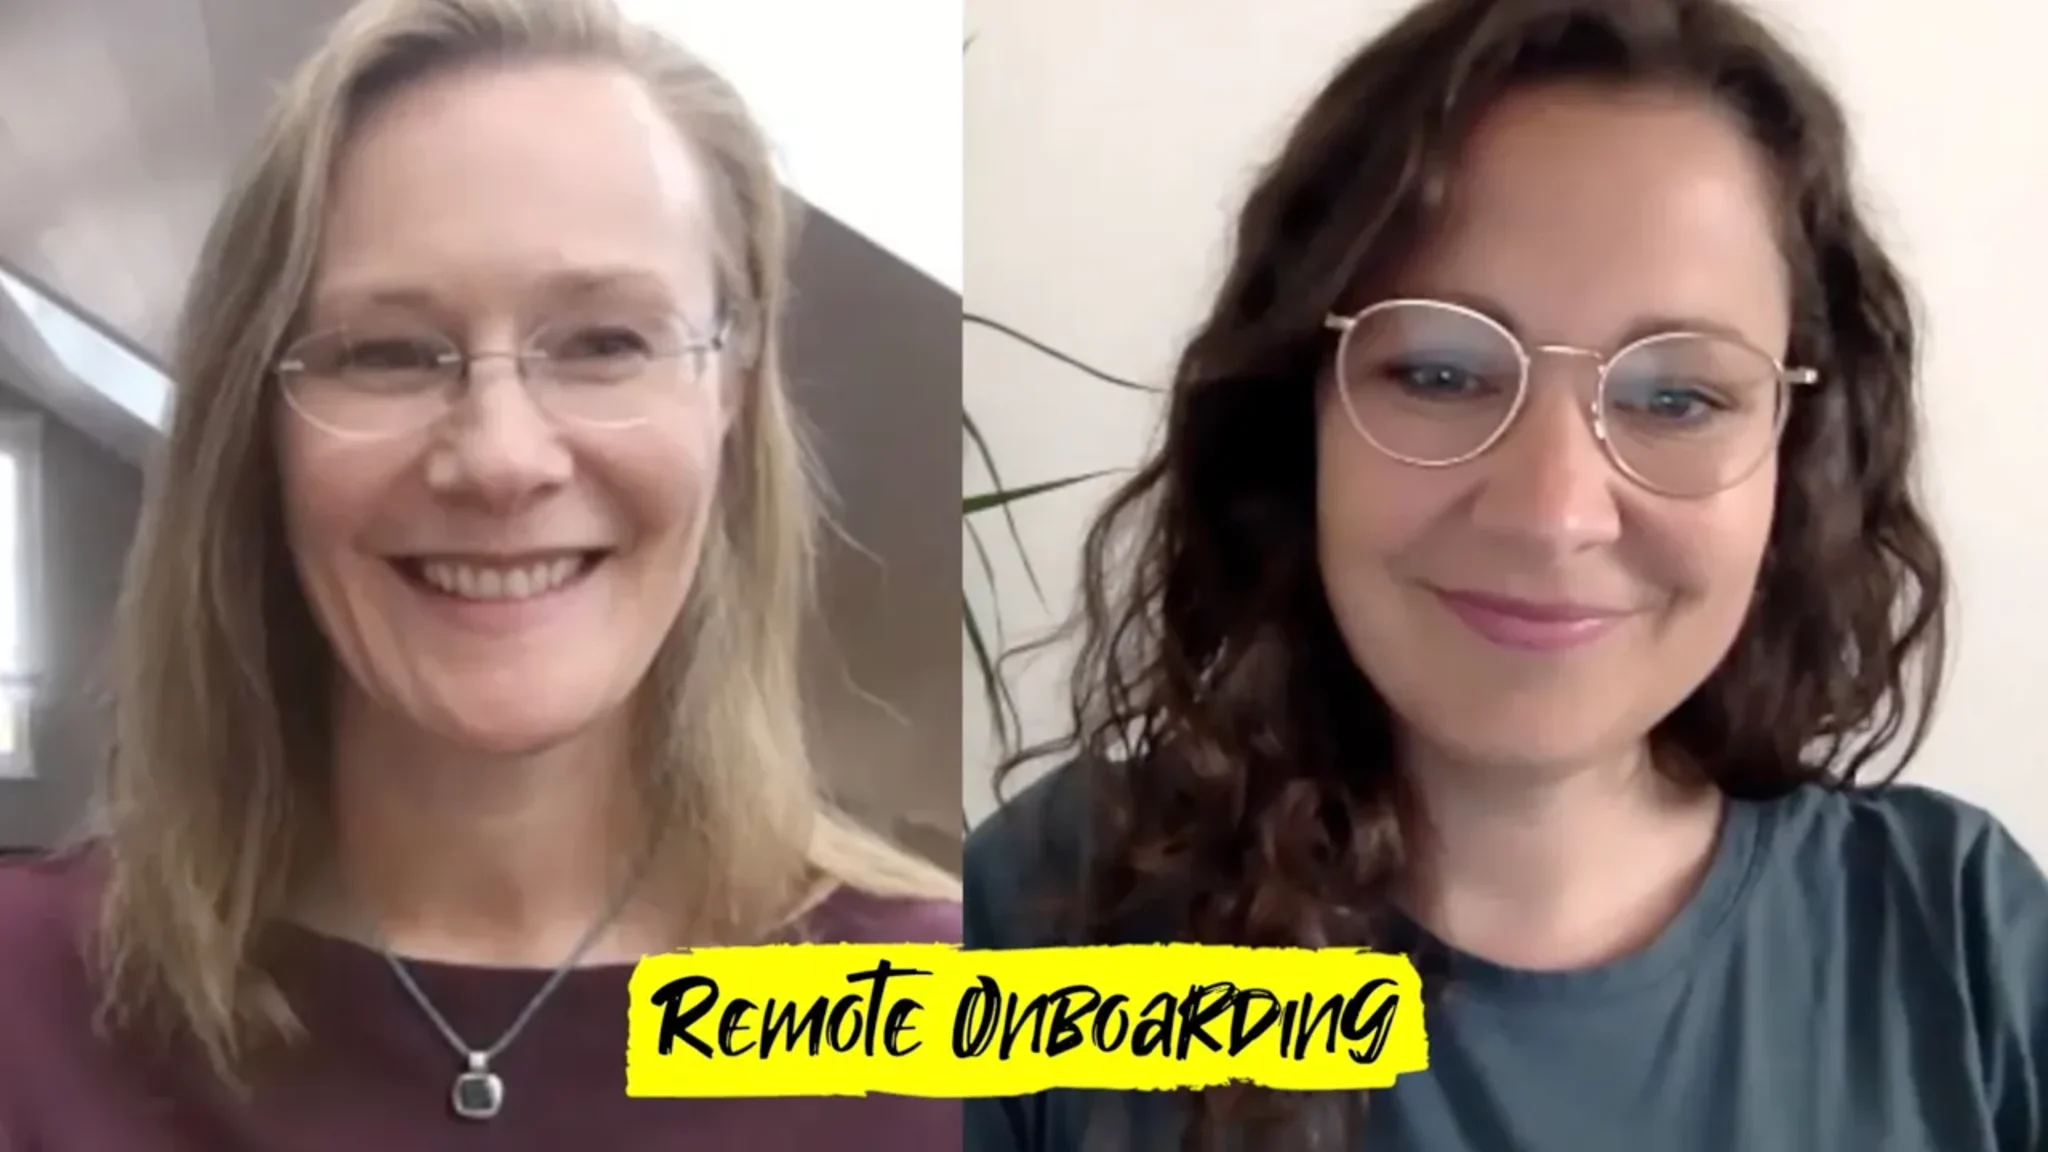 HR Expert Talk: Tools and Tips for Remote Onboarding